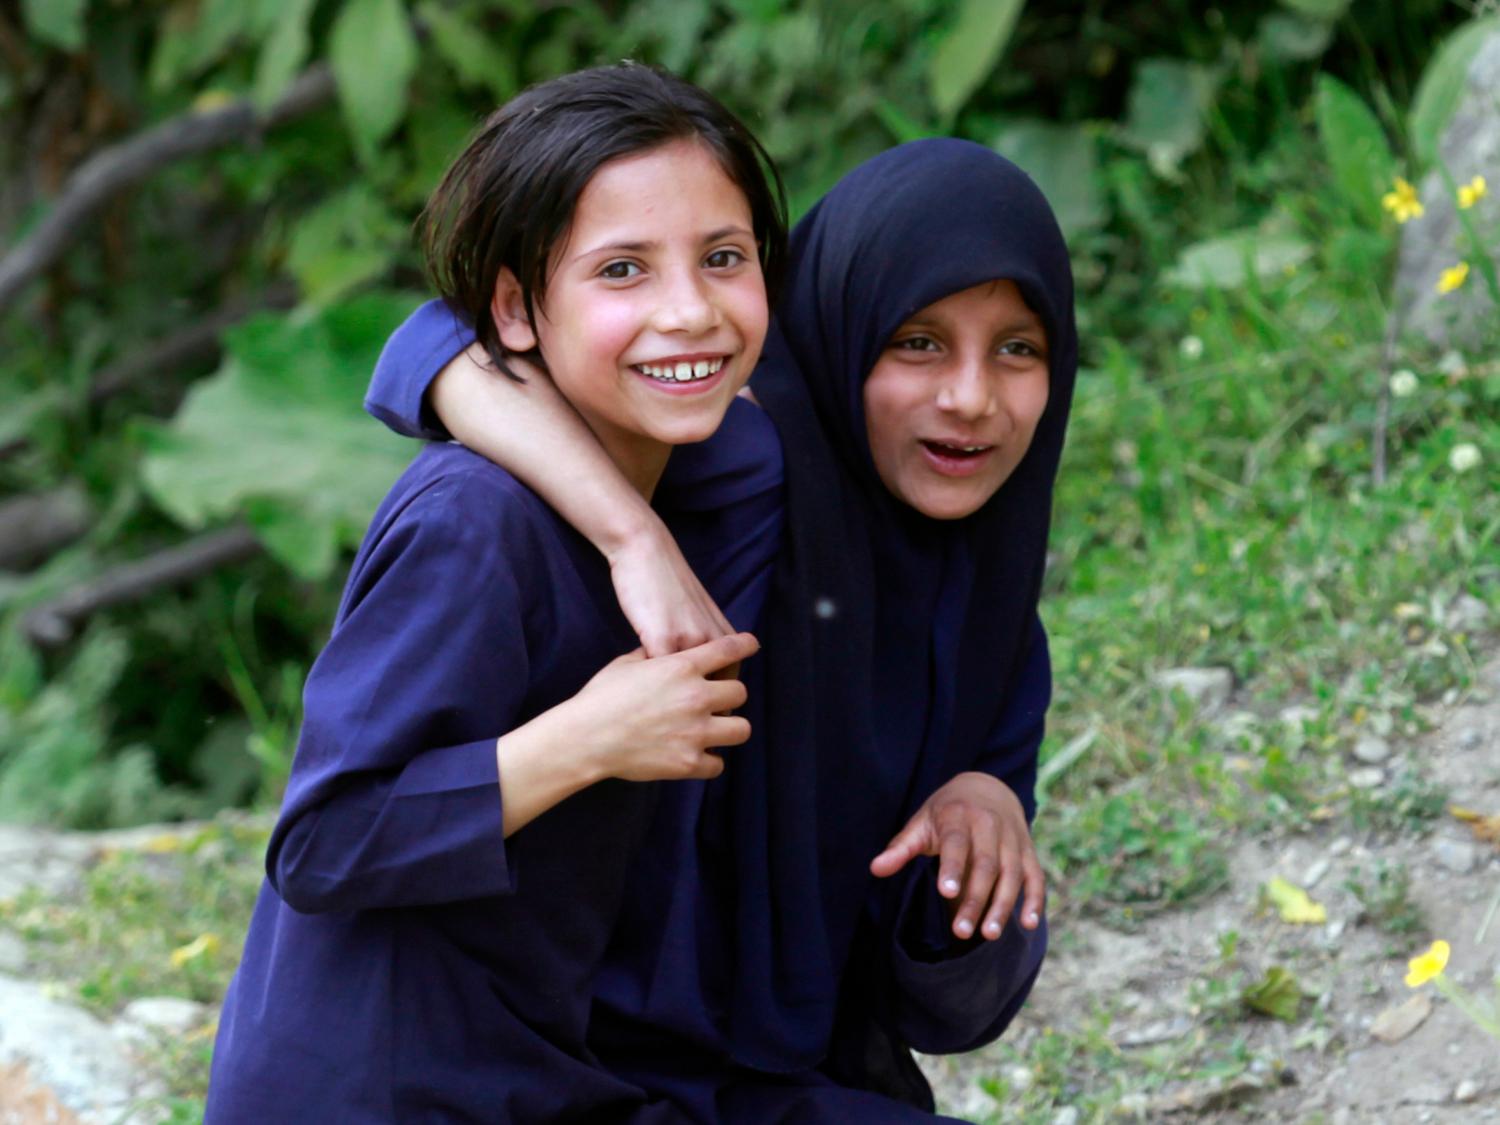 Kashmiri school girls react to the camera while walking back home after their class at Kanzalwan near the Line of Control in Gurez sector, 160 km (99 miles) north of Srinagar June 21, 2012. The Line of Control, or a military ceasefire line, divides India and Pakistan in Kashmir. REUTERS/Fayaz Kabli (INDIAN-ADMINISTERED KASHMIR - Tags: SOCIETY EDUCATION) - GM1E86M04E001